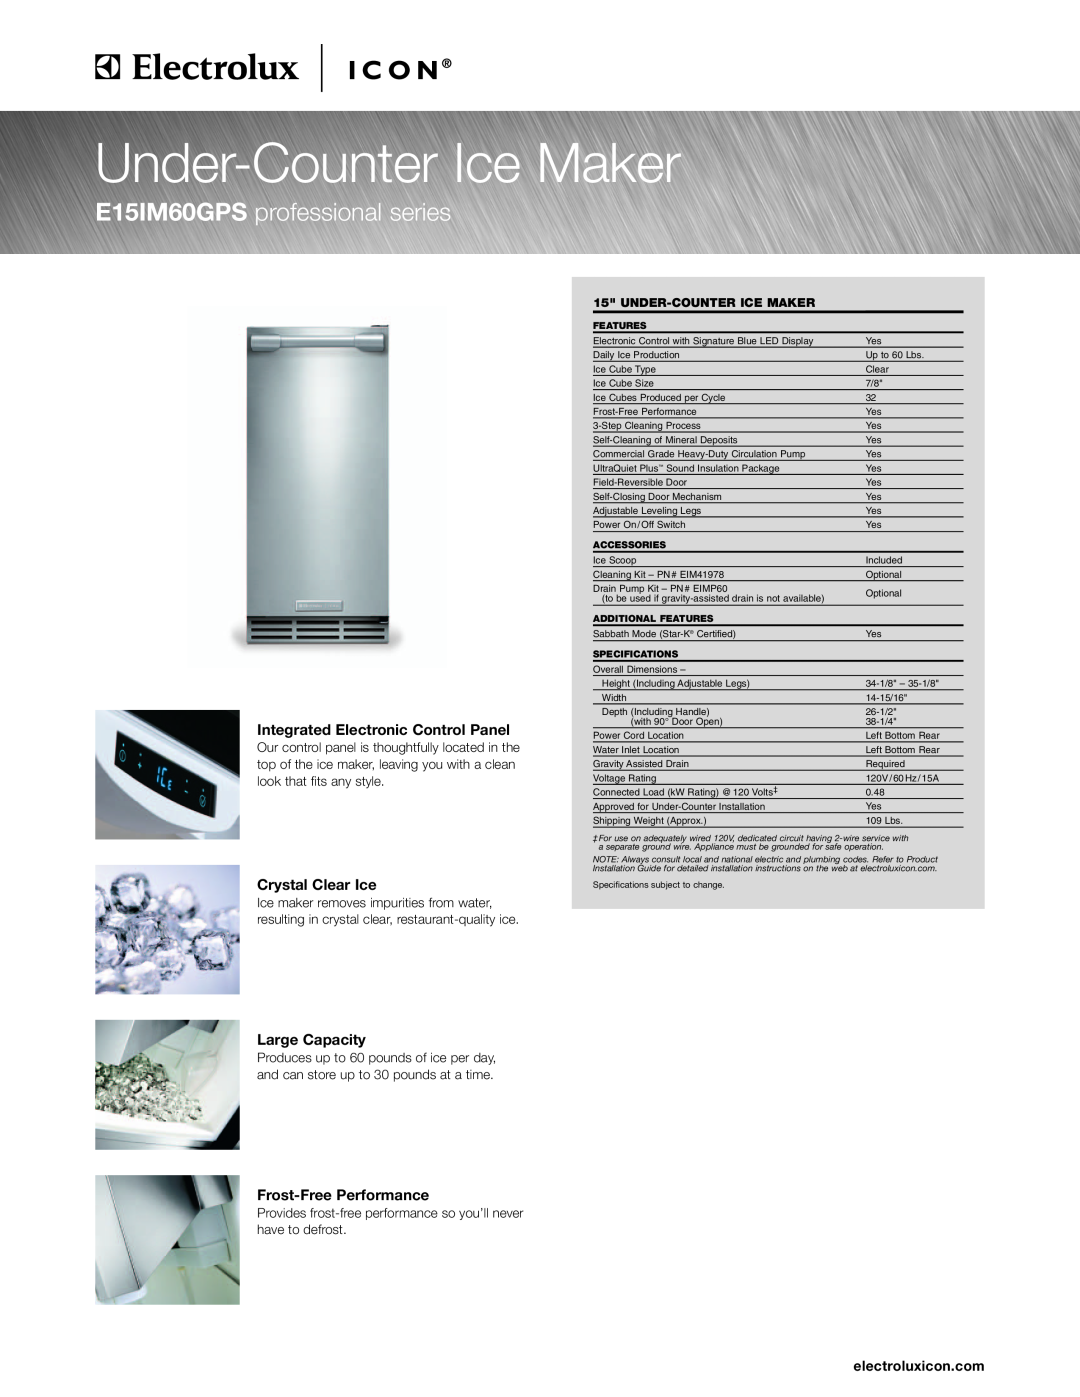 Electrolux E15IM60GPS specifications Integrated Electronic Control Panel, Crystal Clear Ice, Large Capacity 